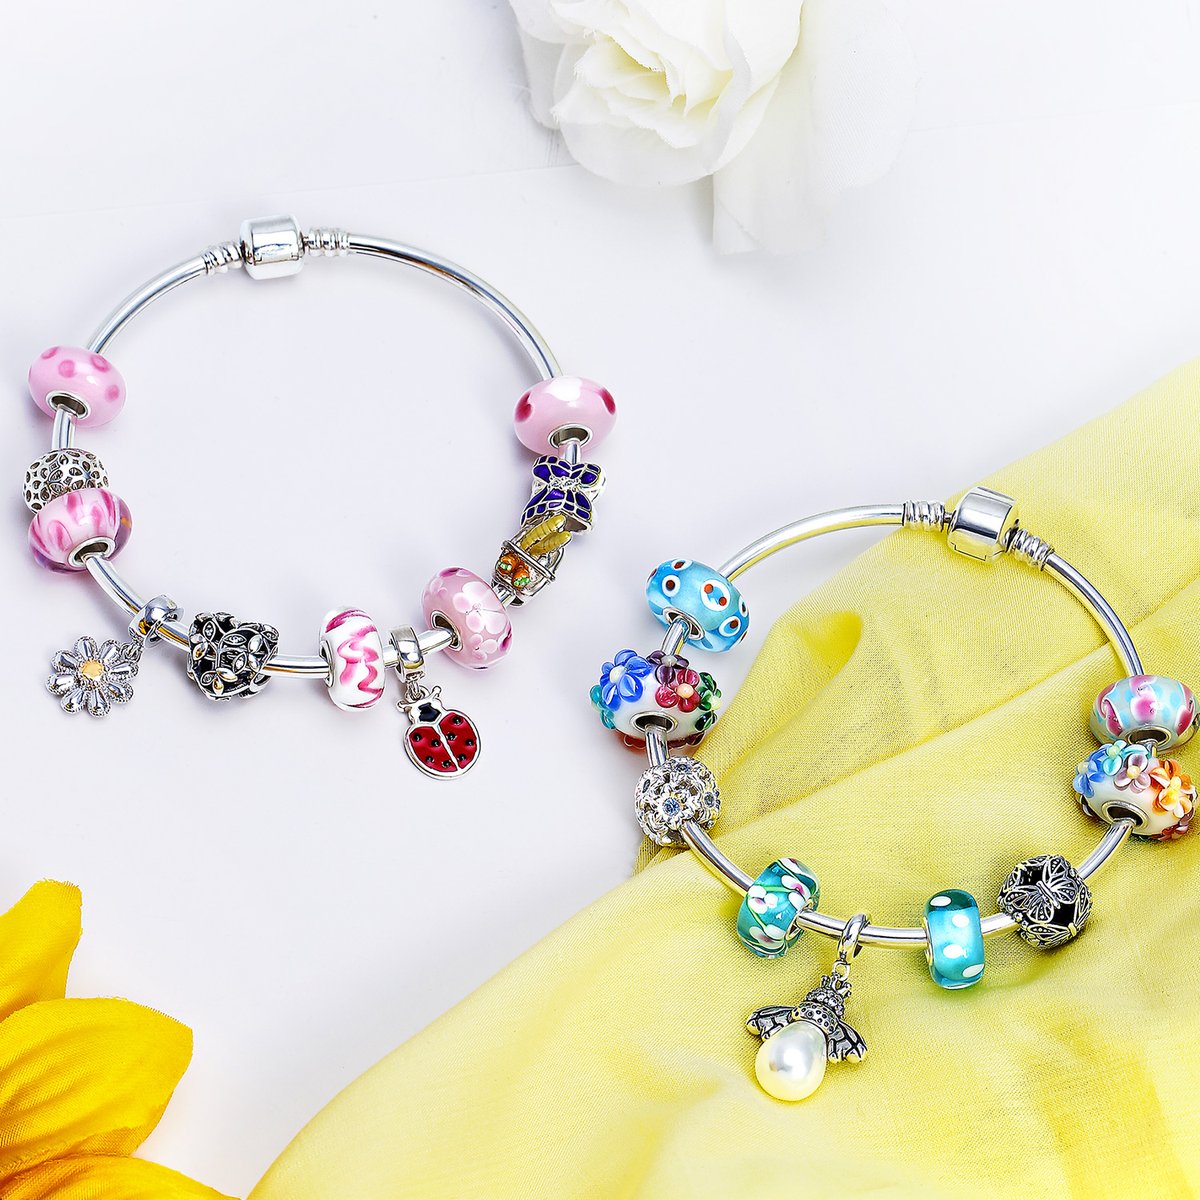 Shop Easter collection and save 20% off! Use code EASTER20 at checkout
blingjewelry.com/collections/ea…
#easterjewelry #crossjewelry #jewelrysale